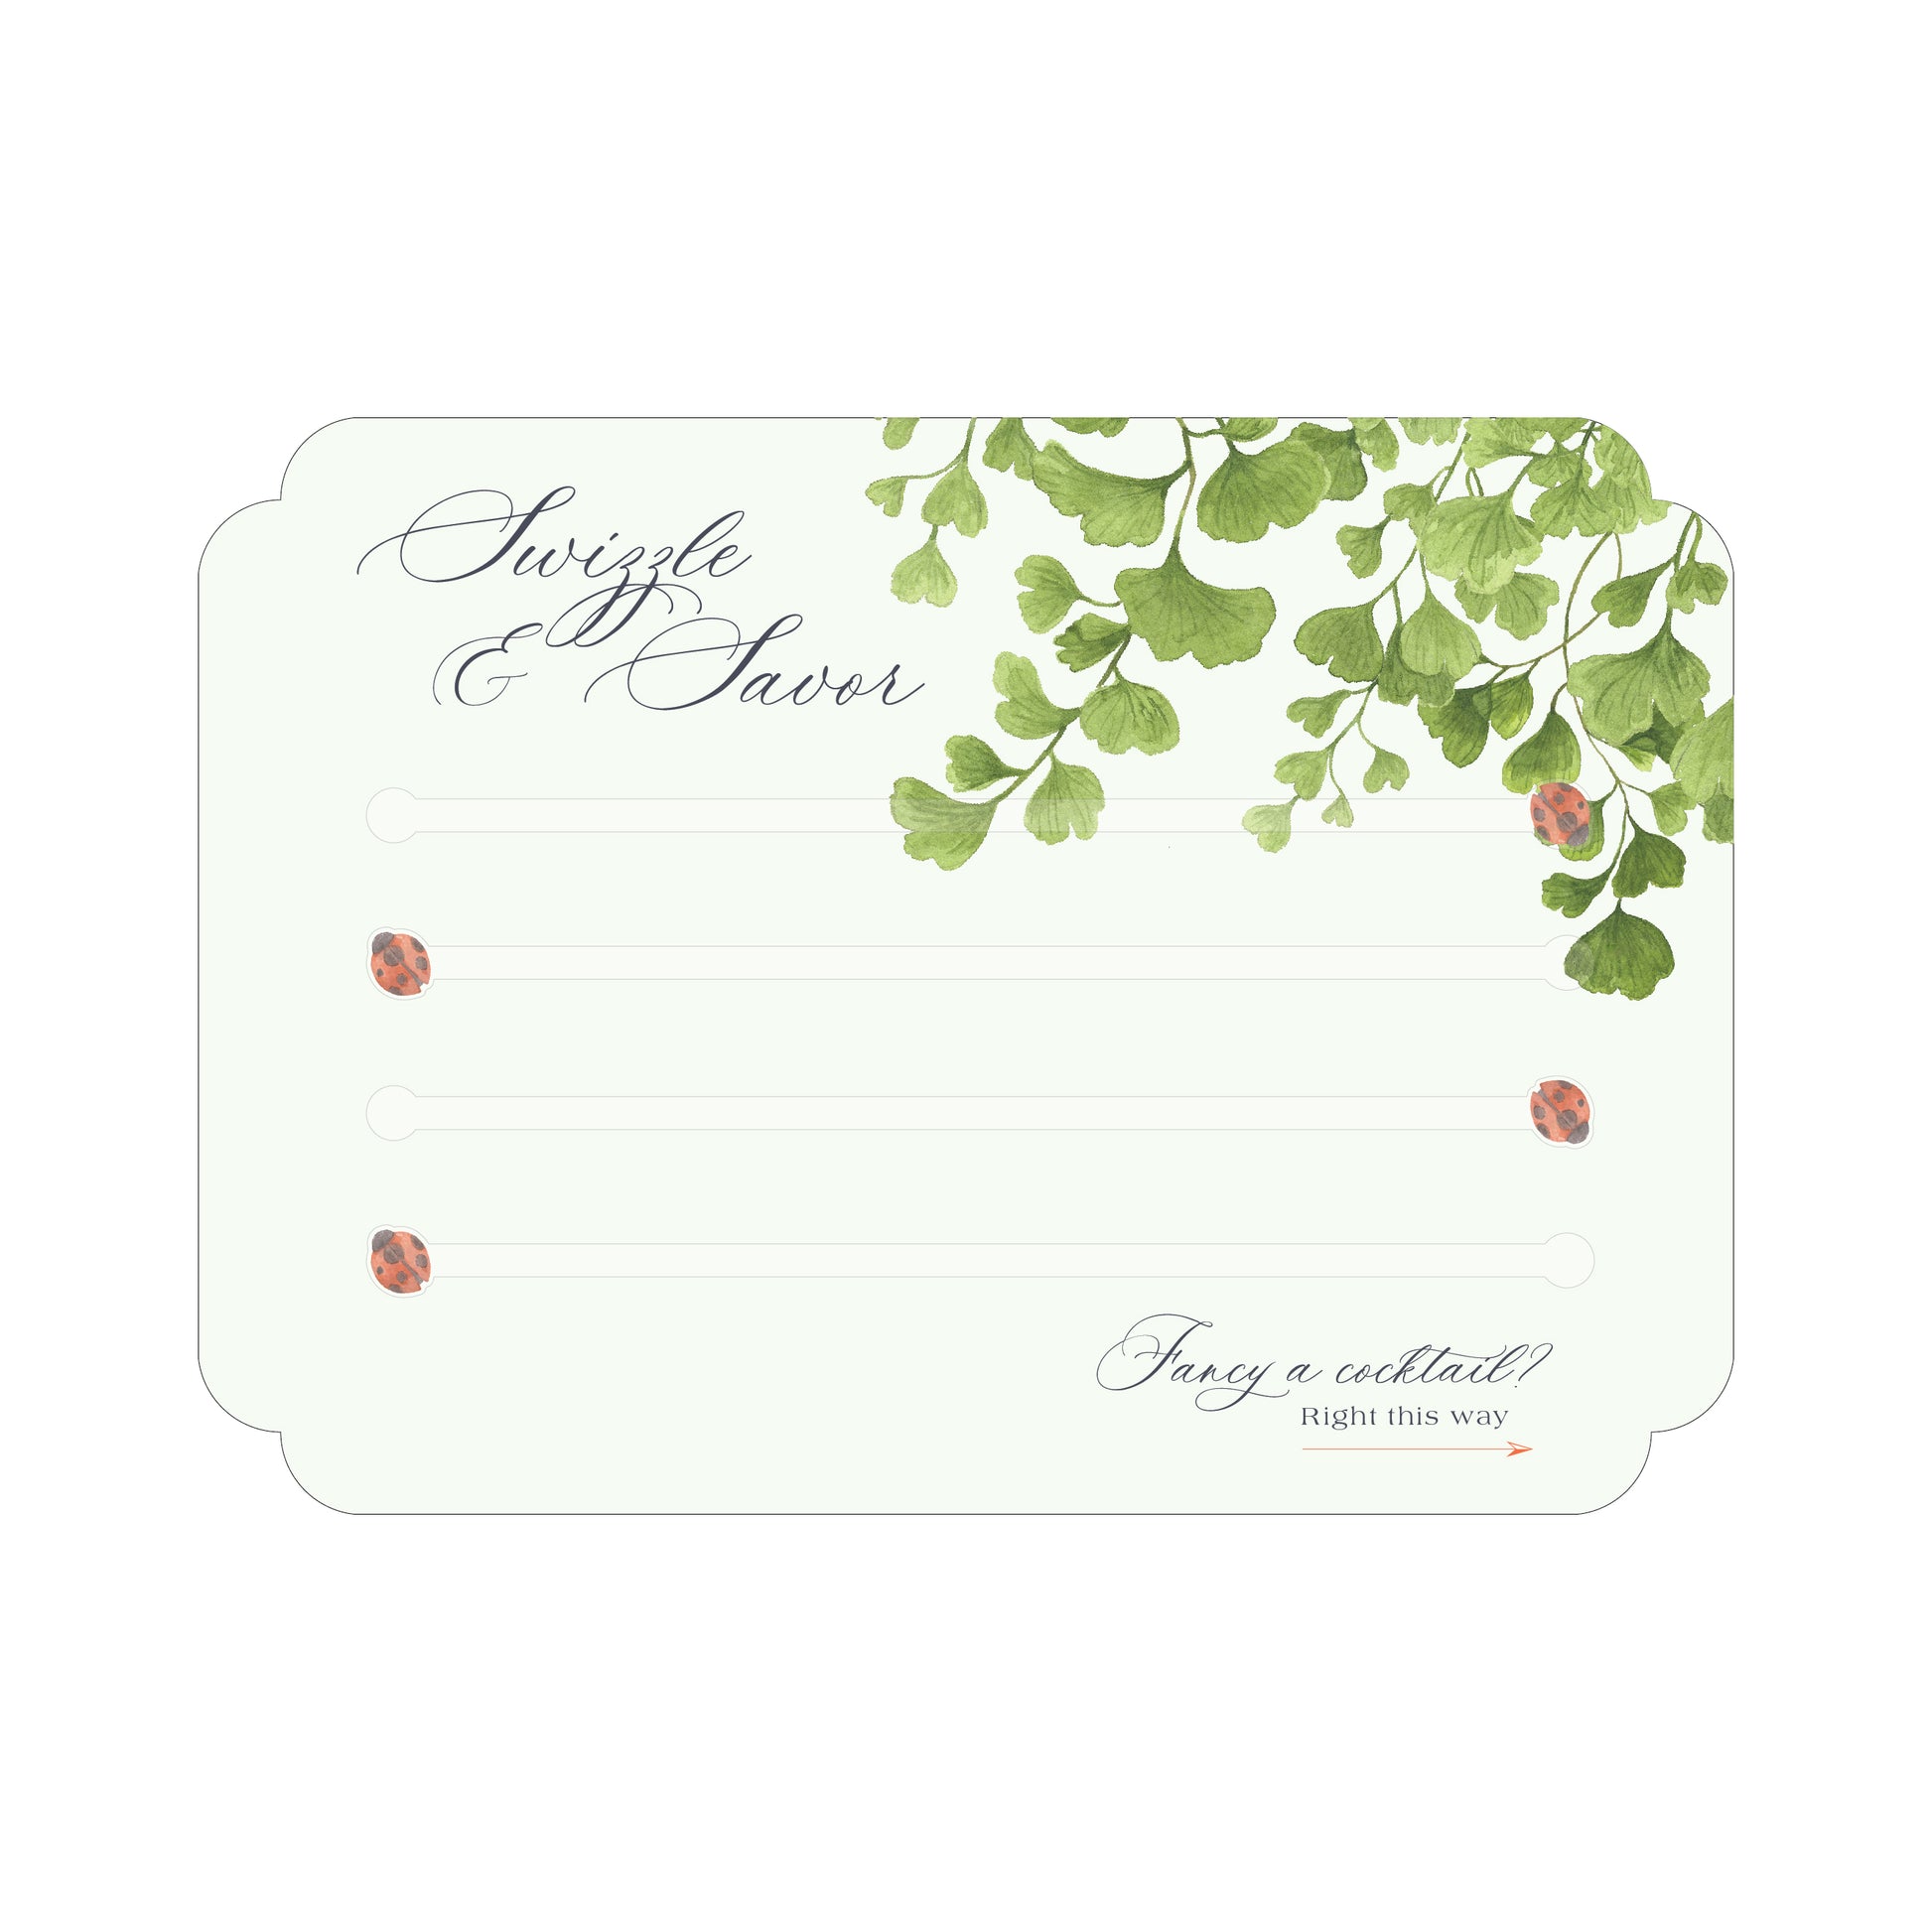 Paper card featuring maidenhair fern watercolor artwork and four acrylic clear swizzle sticks with red ladybugs at the end.